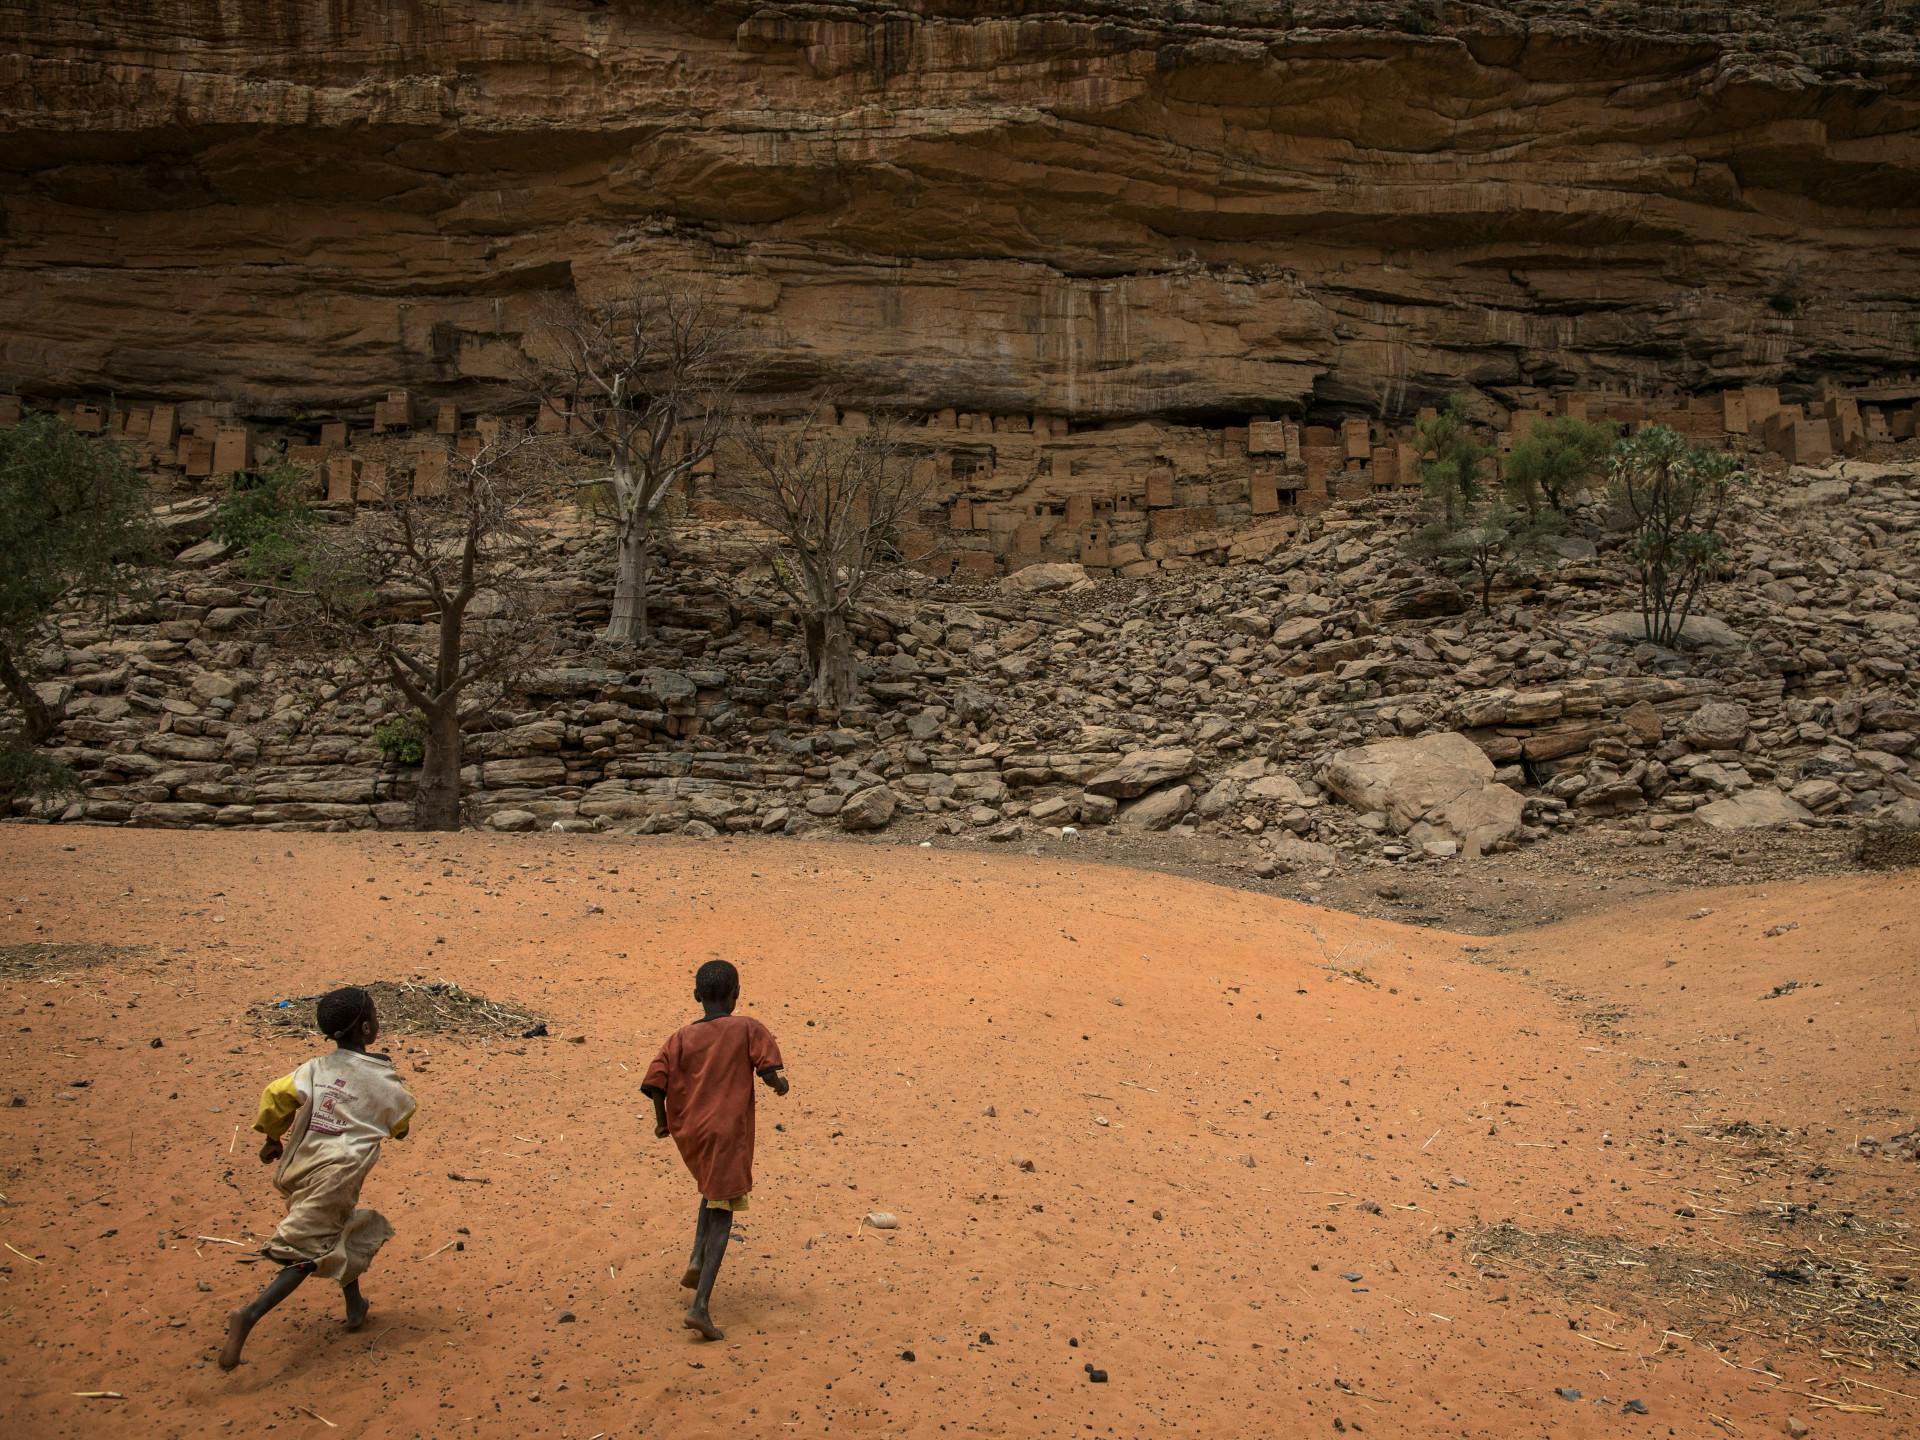 Symbolic photo: Two children running through a dry area in Mali.